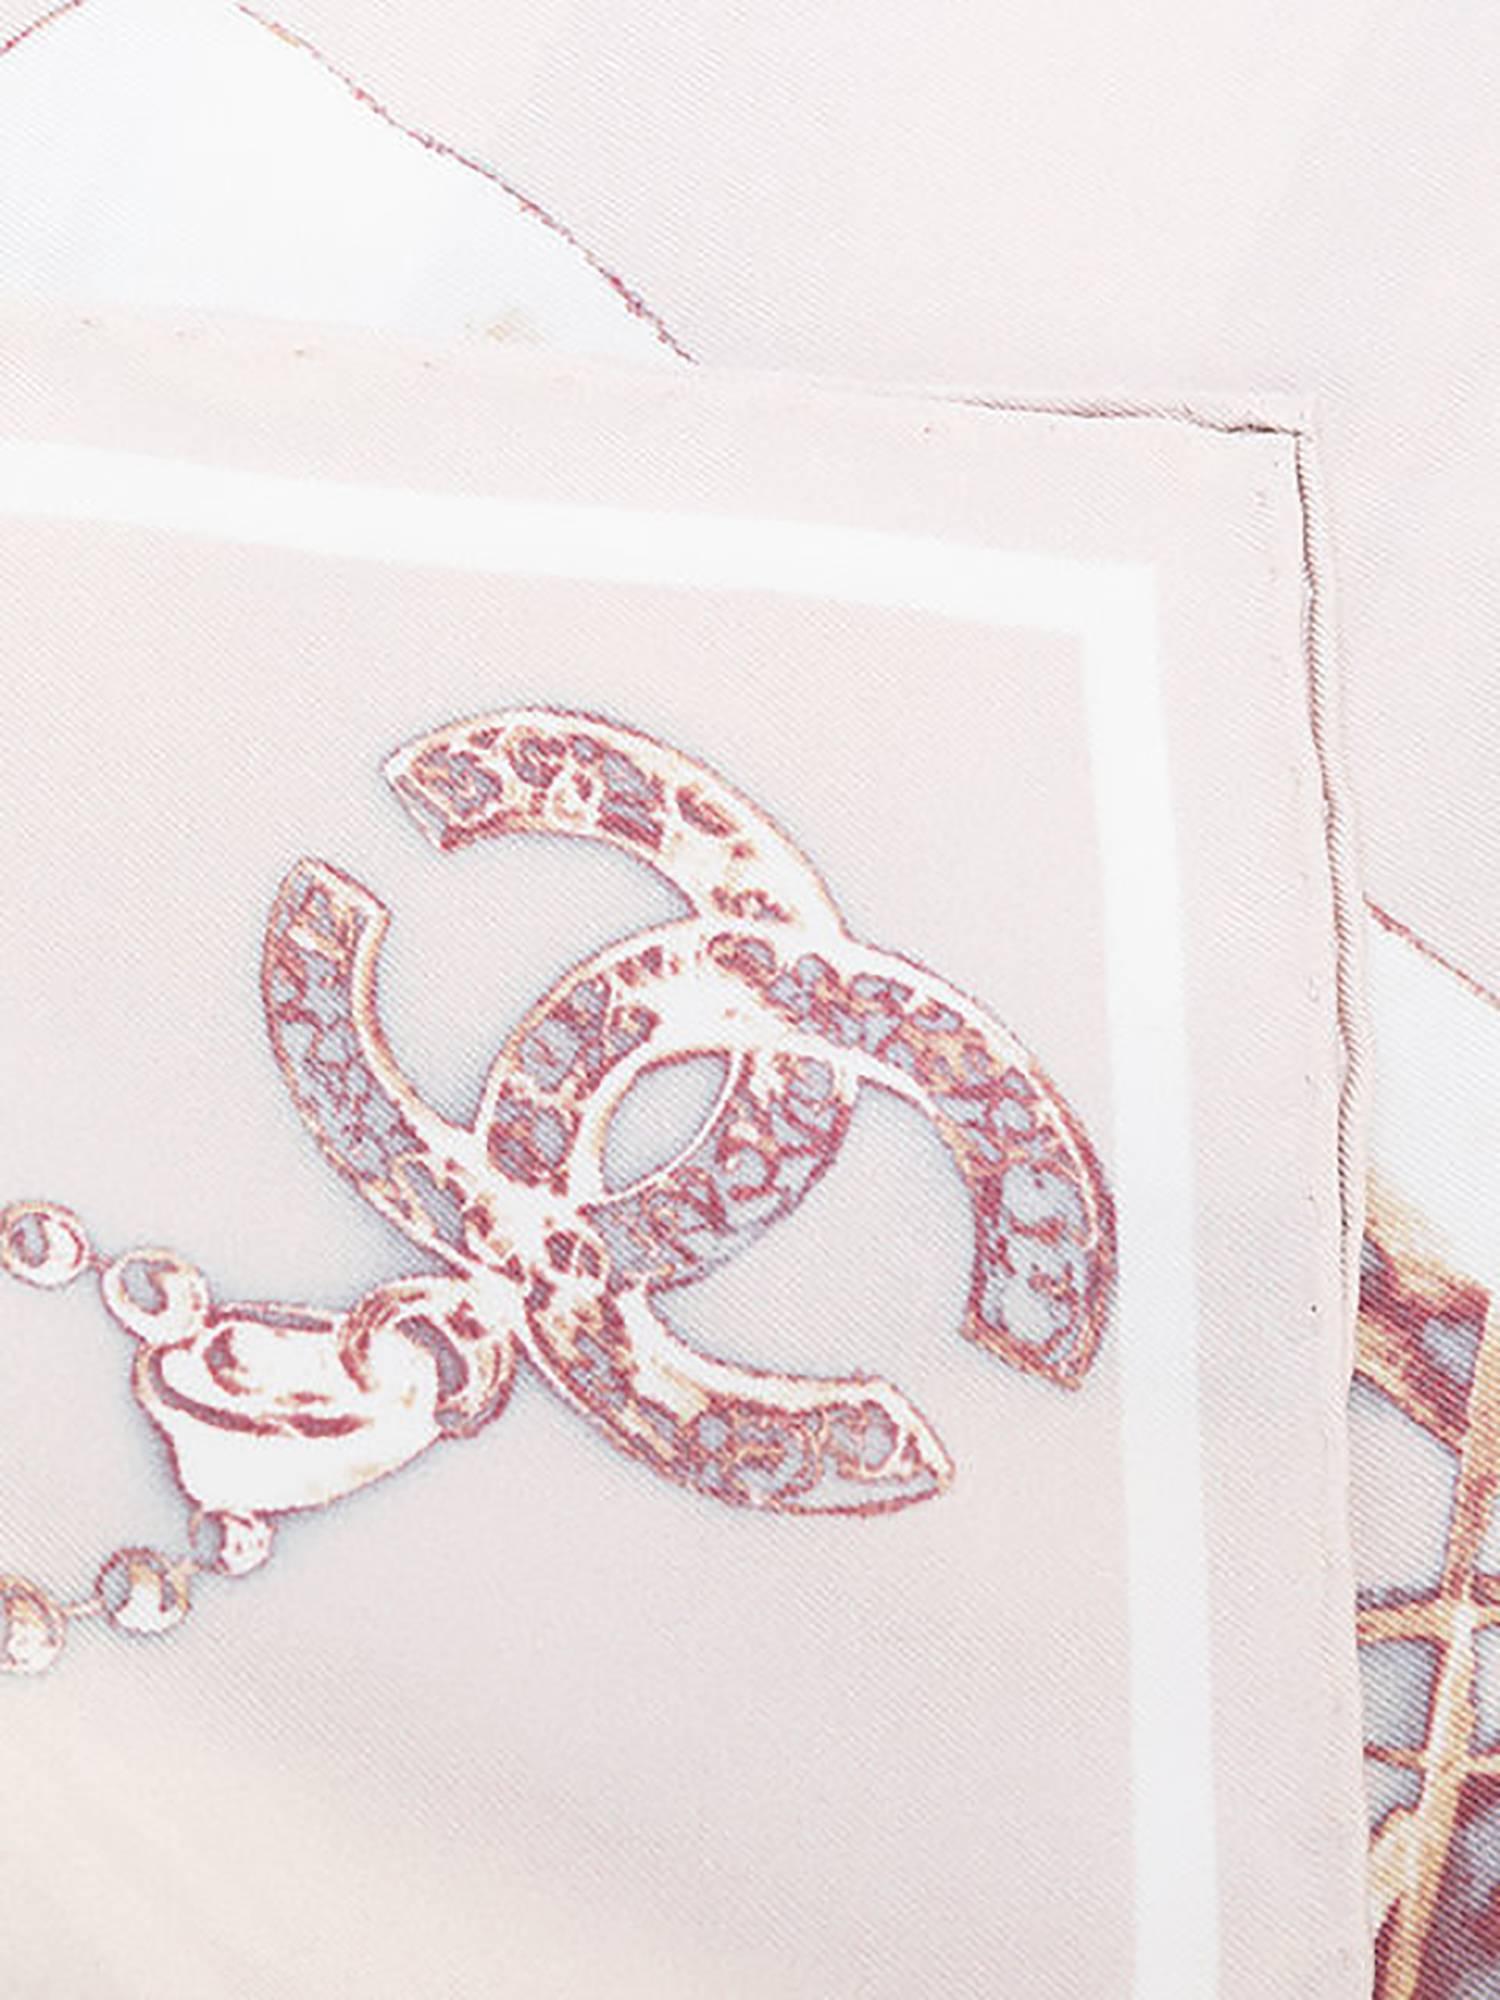 Antique pink silk draft print scarf from Chanel Vintage featuring a signature interlocking CC logo. Please note that vintage items are not new and therefore might have minor imperfections.

Made in Italy